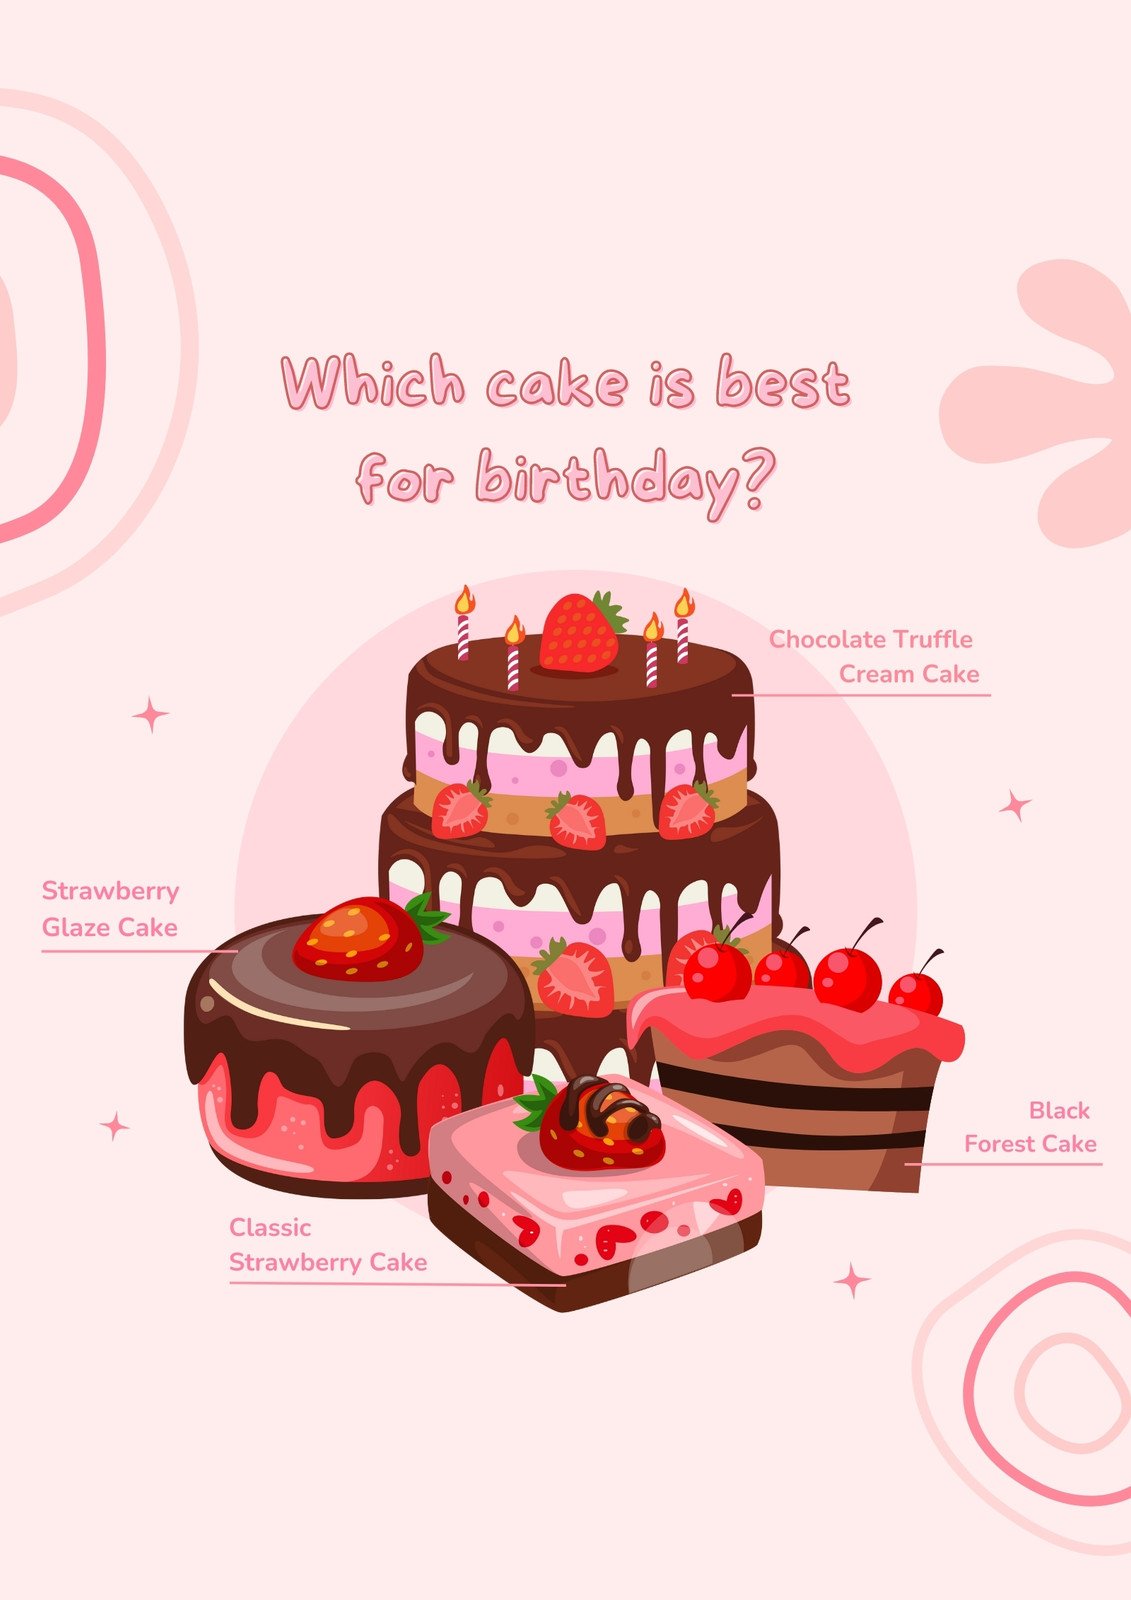 Professional Cake Flyer | PSD Free Download - Pikbest